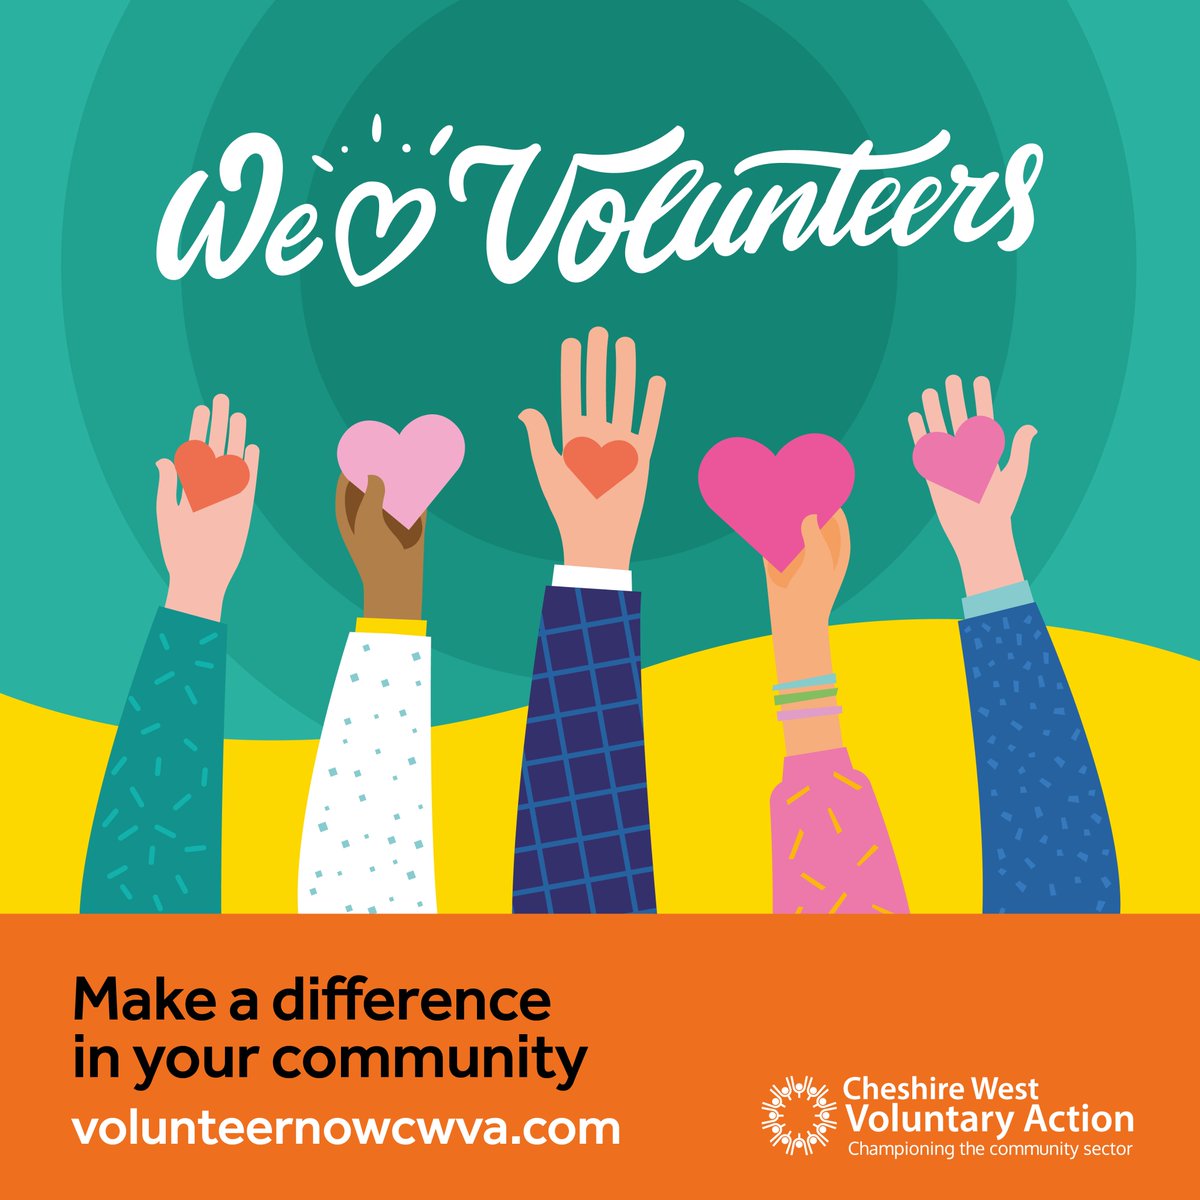 🌟Want to make a difference in your community? Become a volunteer!🤝 Explore various roles on #WeAreCWVA's volunteer platform.  

Have a volunteering opportunity to share? Advertise it on our platform! Create positive change! ➡️volunteernowcwva.com/index-classic #Volunteer #NeverMoreNeeded